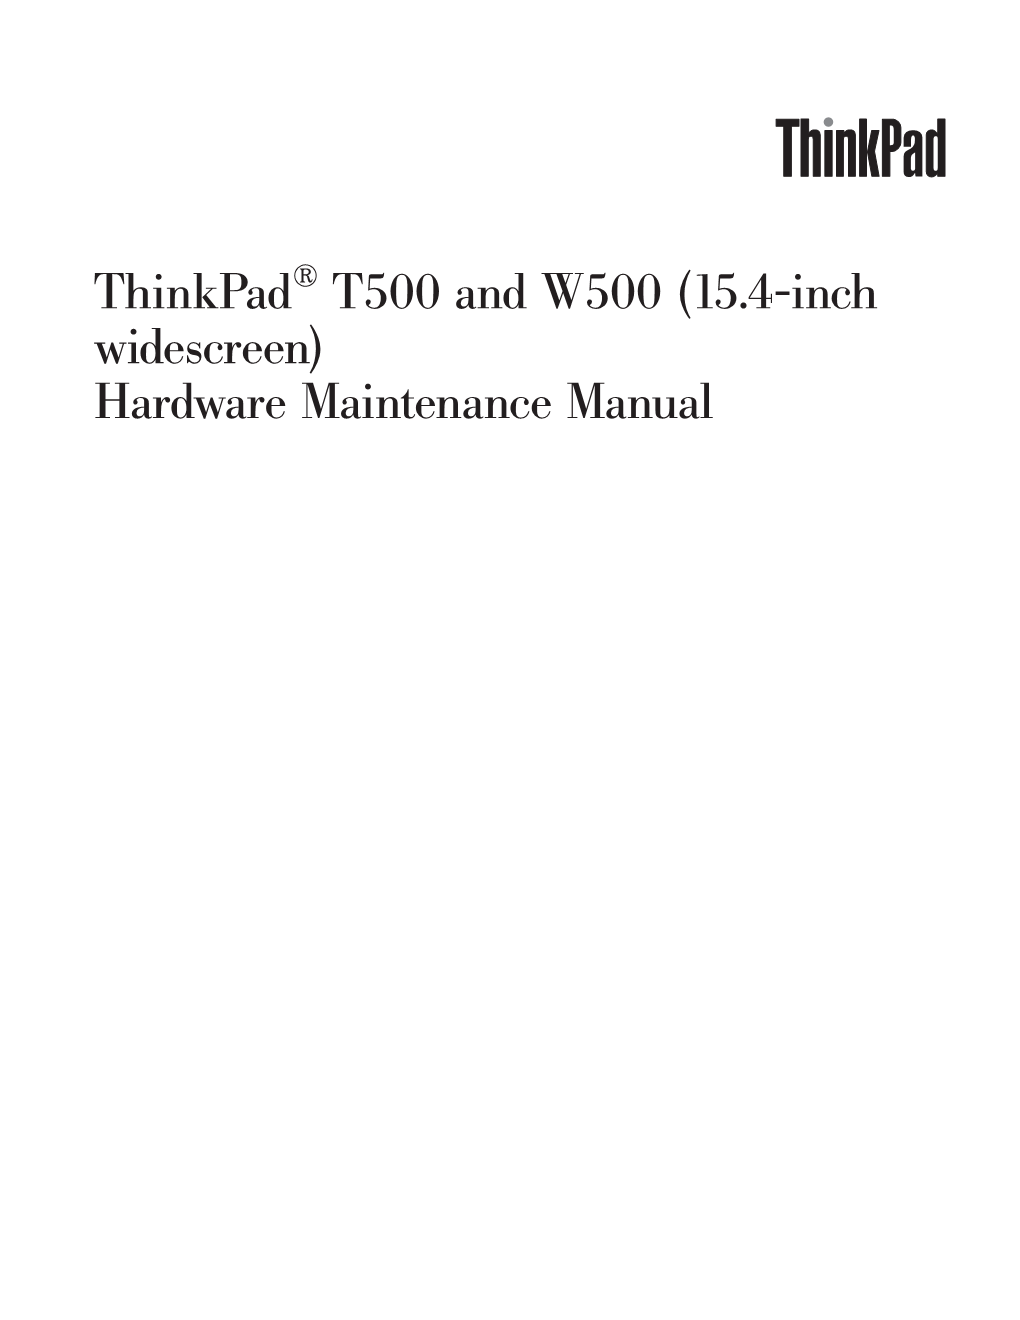 Thinkpad T500 and W500 (15.4-Inch Widescreen) Hardware Maintenance Manual